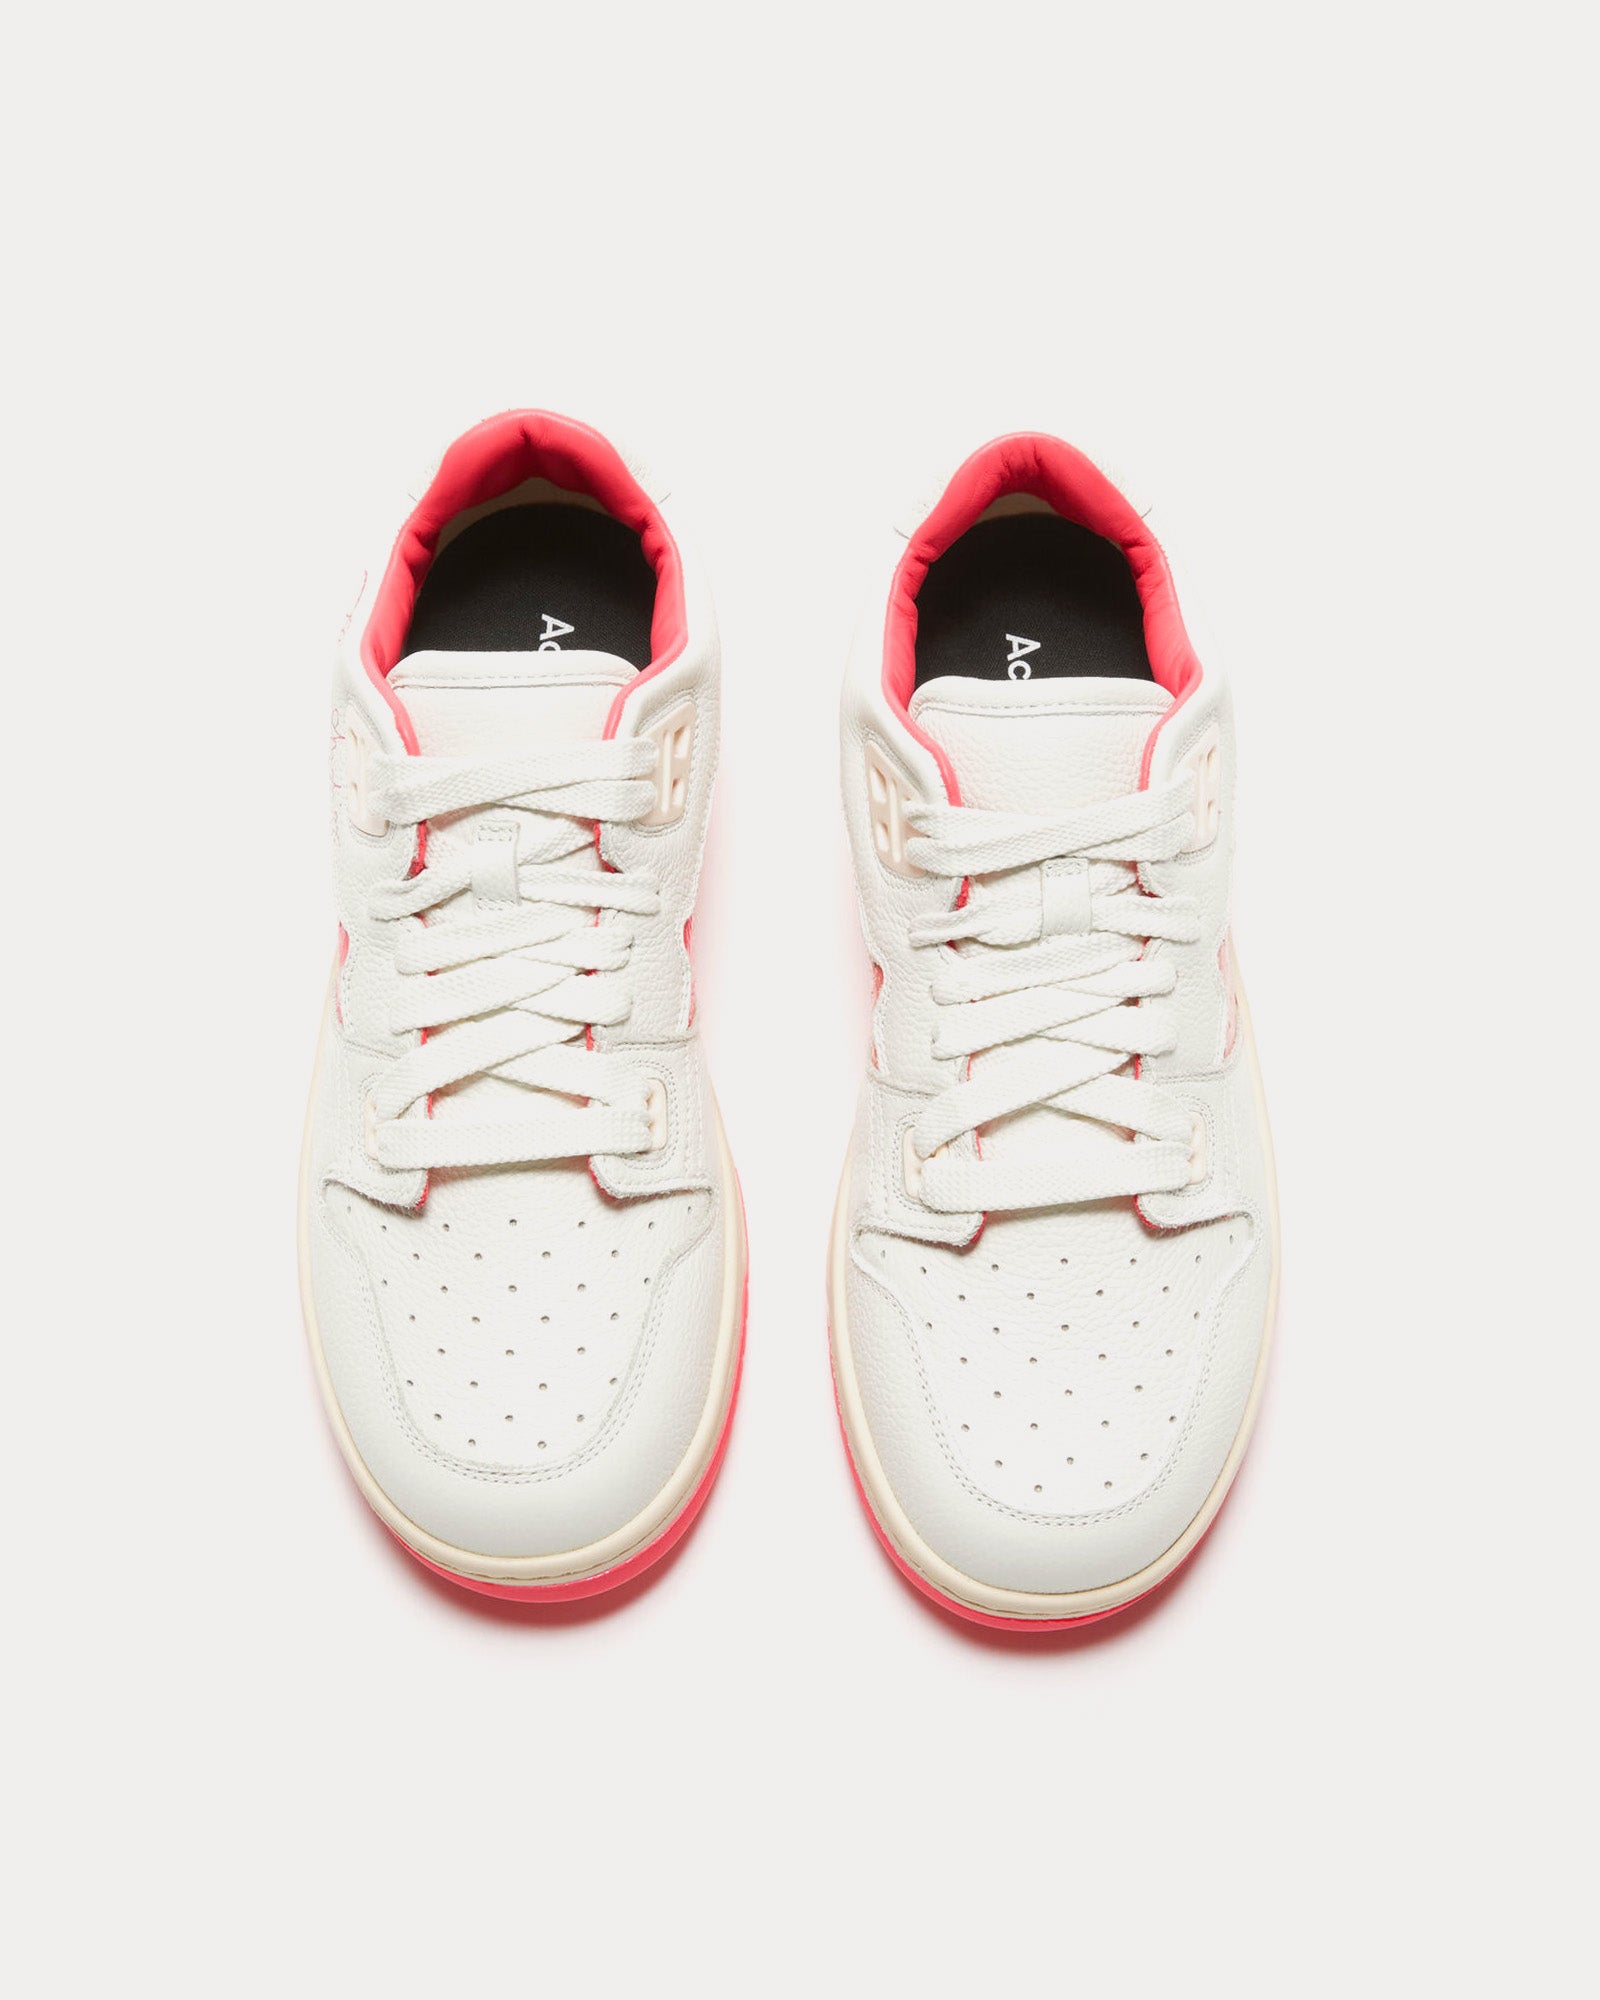 Acne Studios - 08sthlm Basketball White / Electric Pink Low Top Sneakers